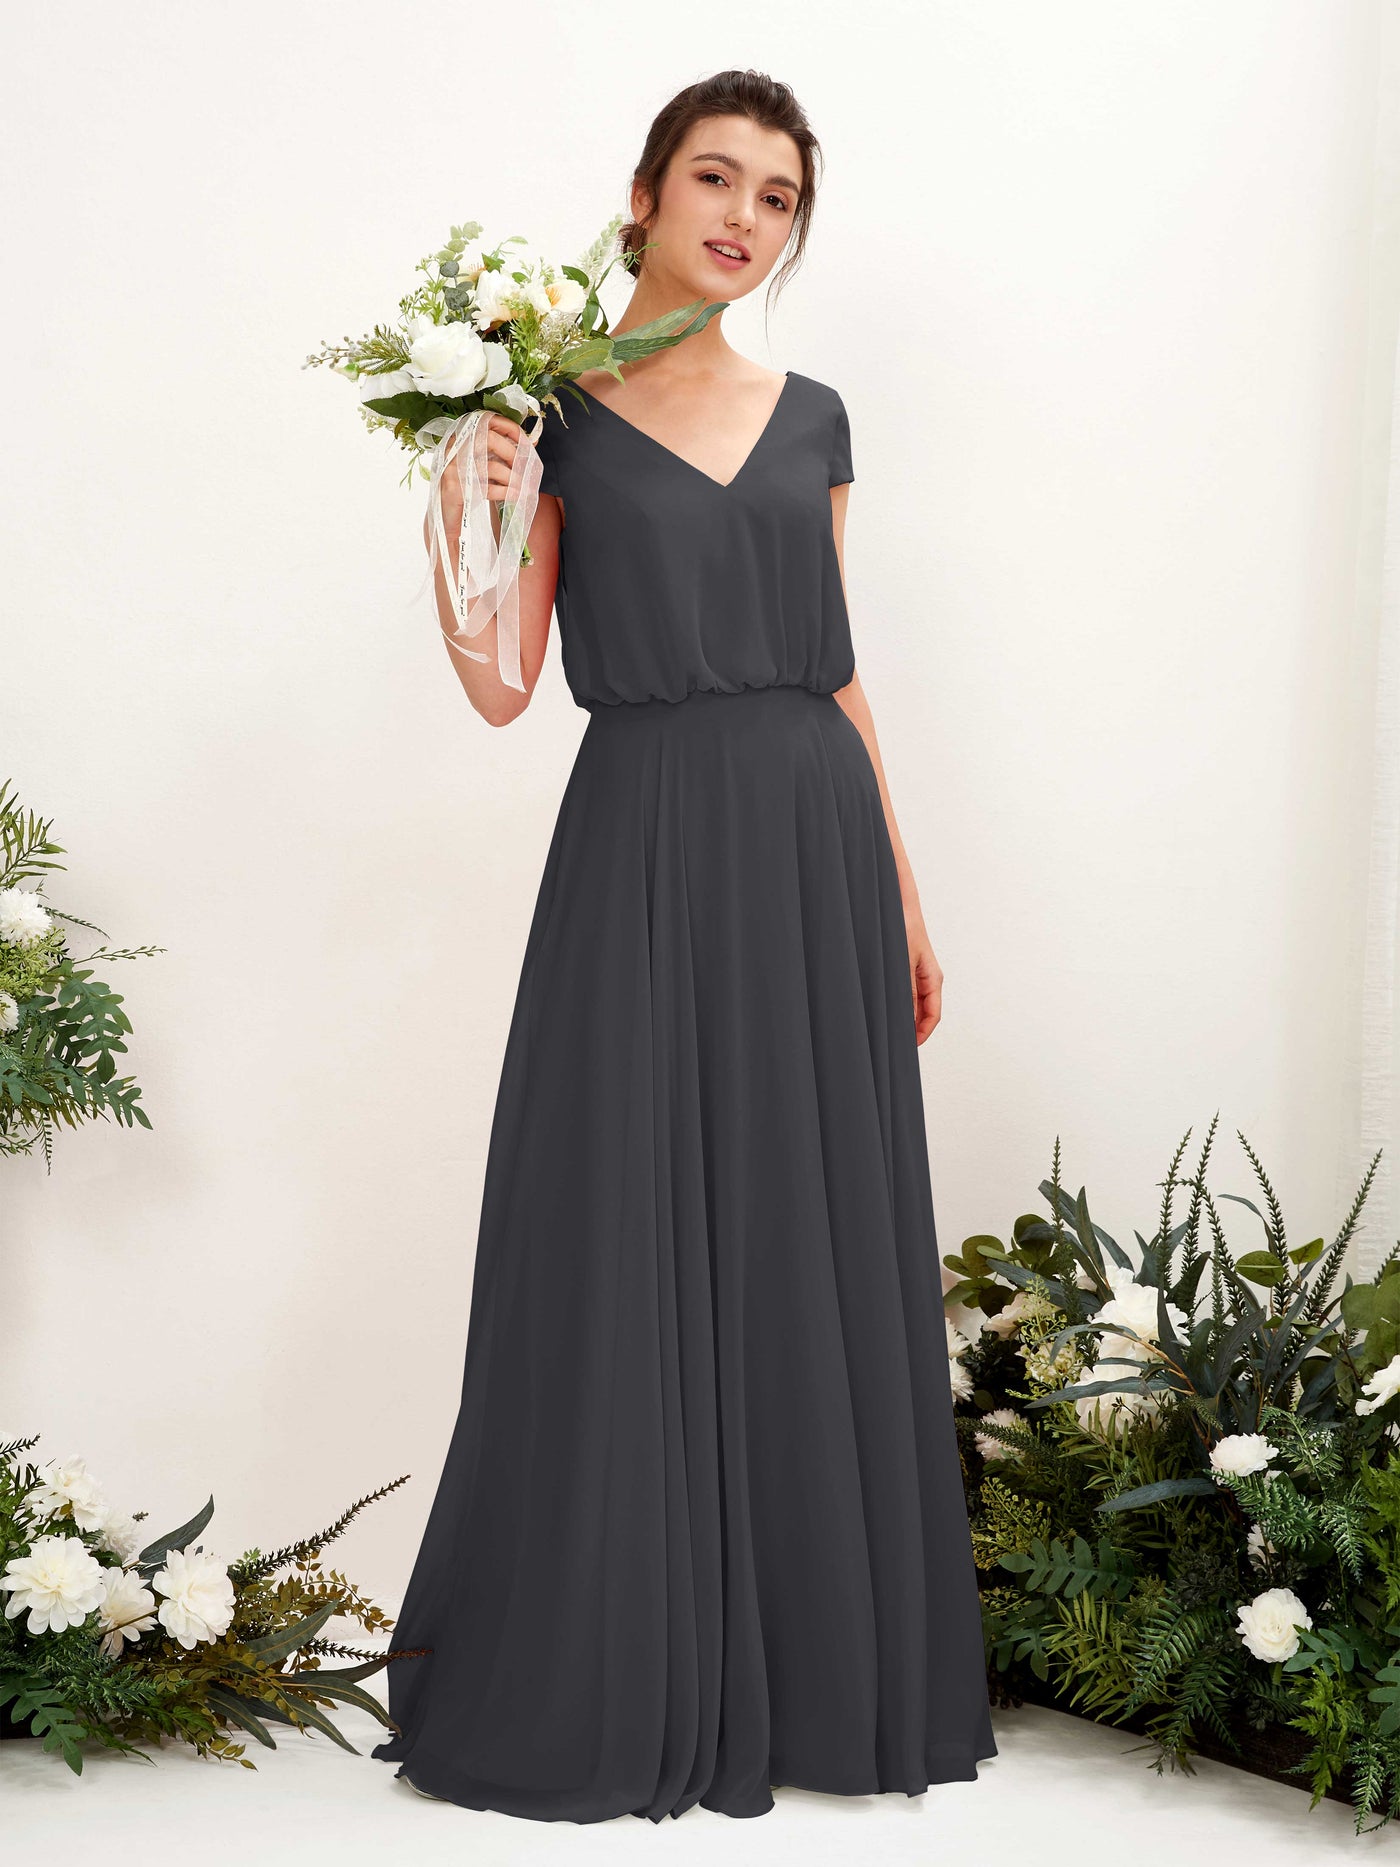 Pewter Bridesmaid Dresses Bridesmaid Dress A-line Chiffon V-neck Full Length Short Sleeves Wedding Party Dress (81221838)#color_pewter